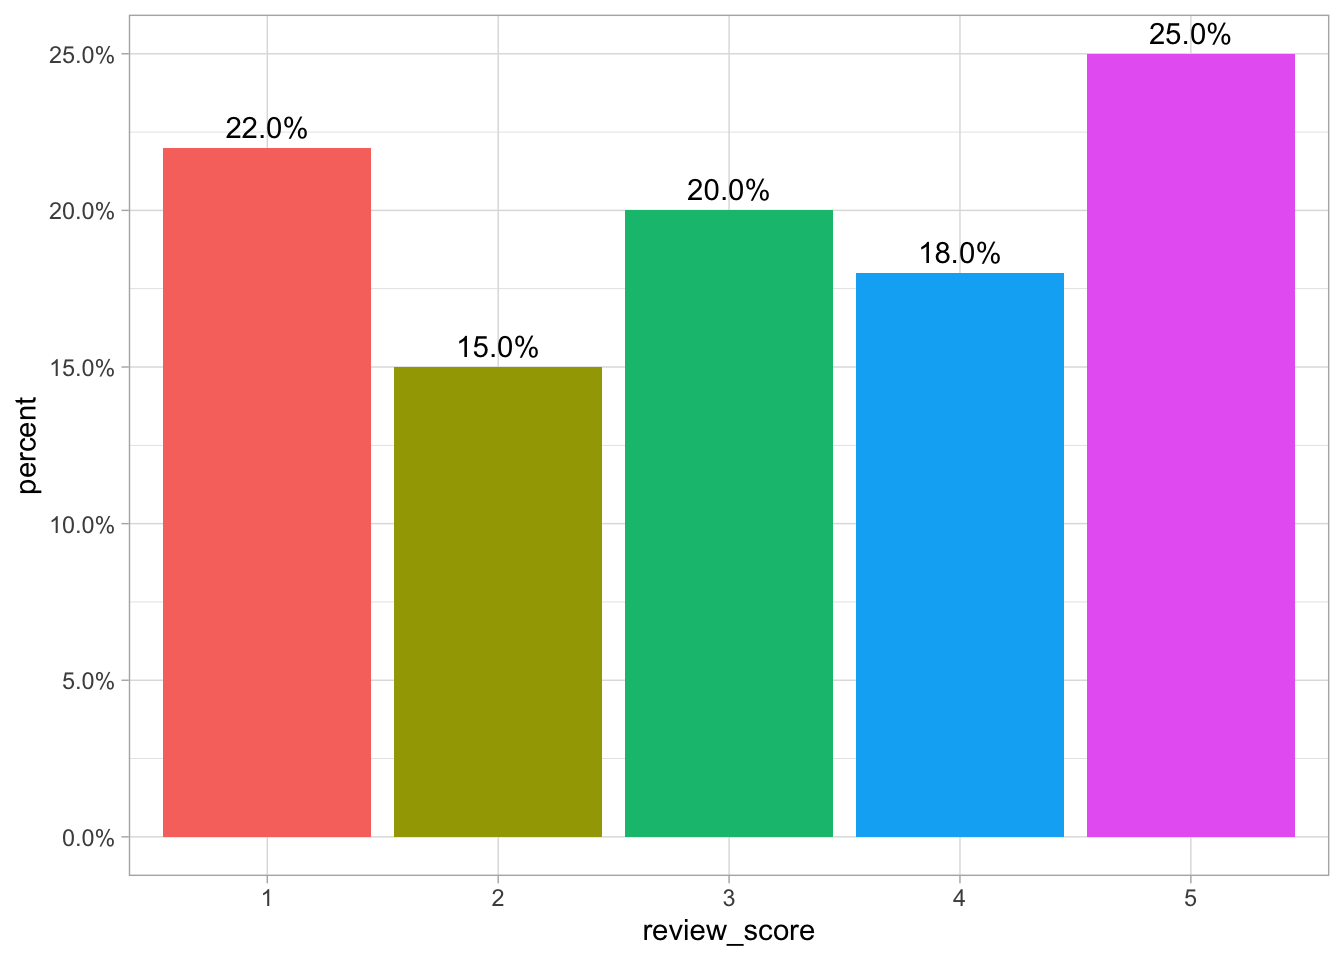 A bar chart of review scores